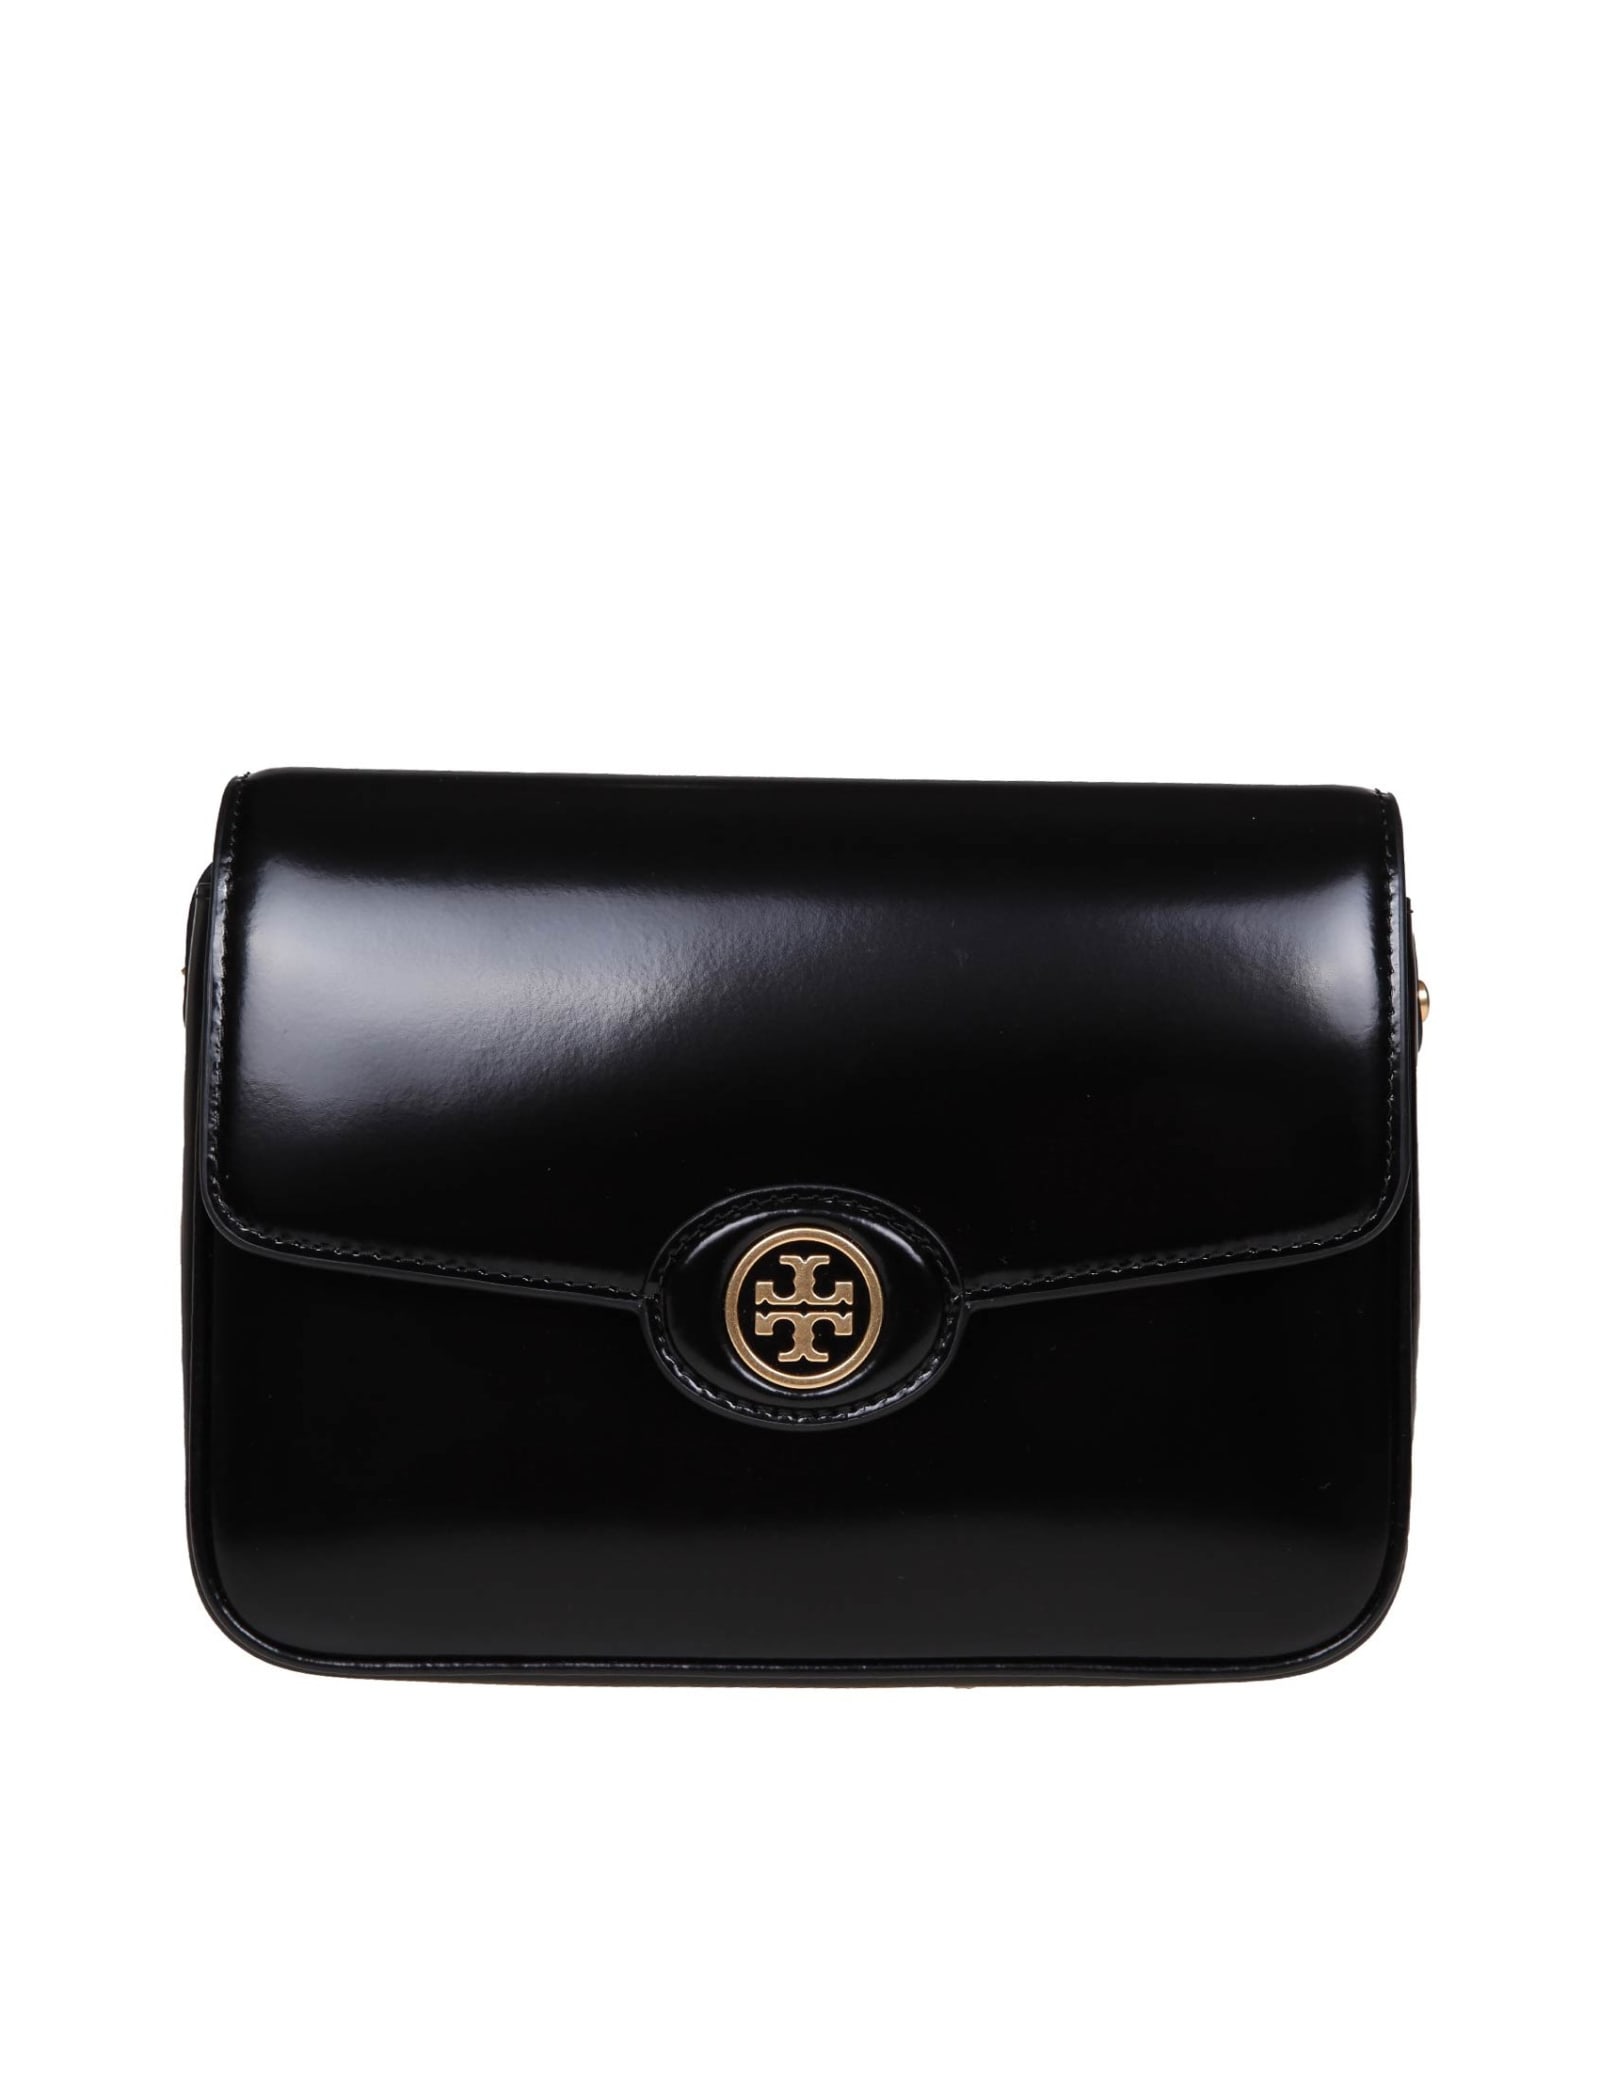 Shop Tory Burch Robinson Bag In Brushed Leather Color Black